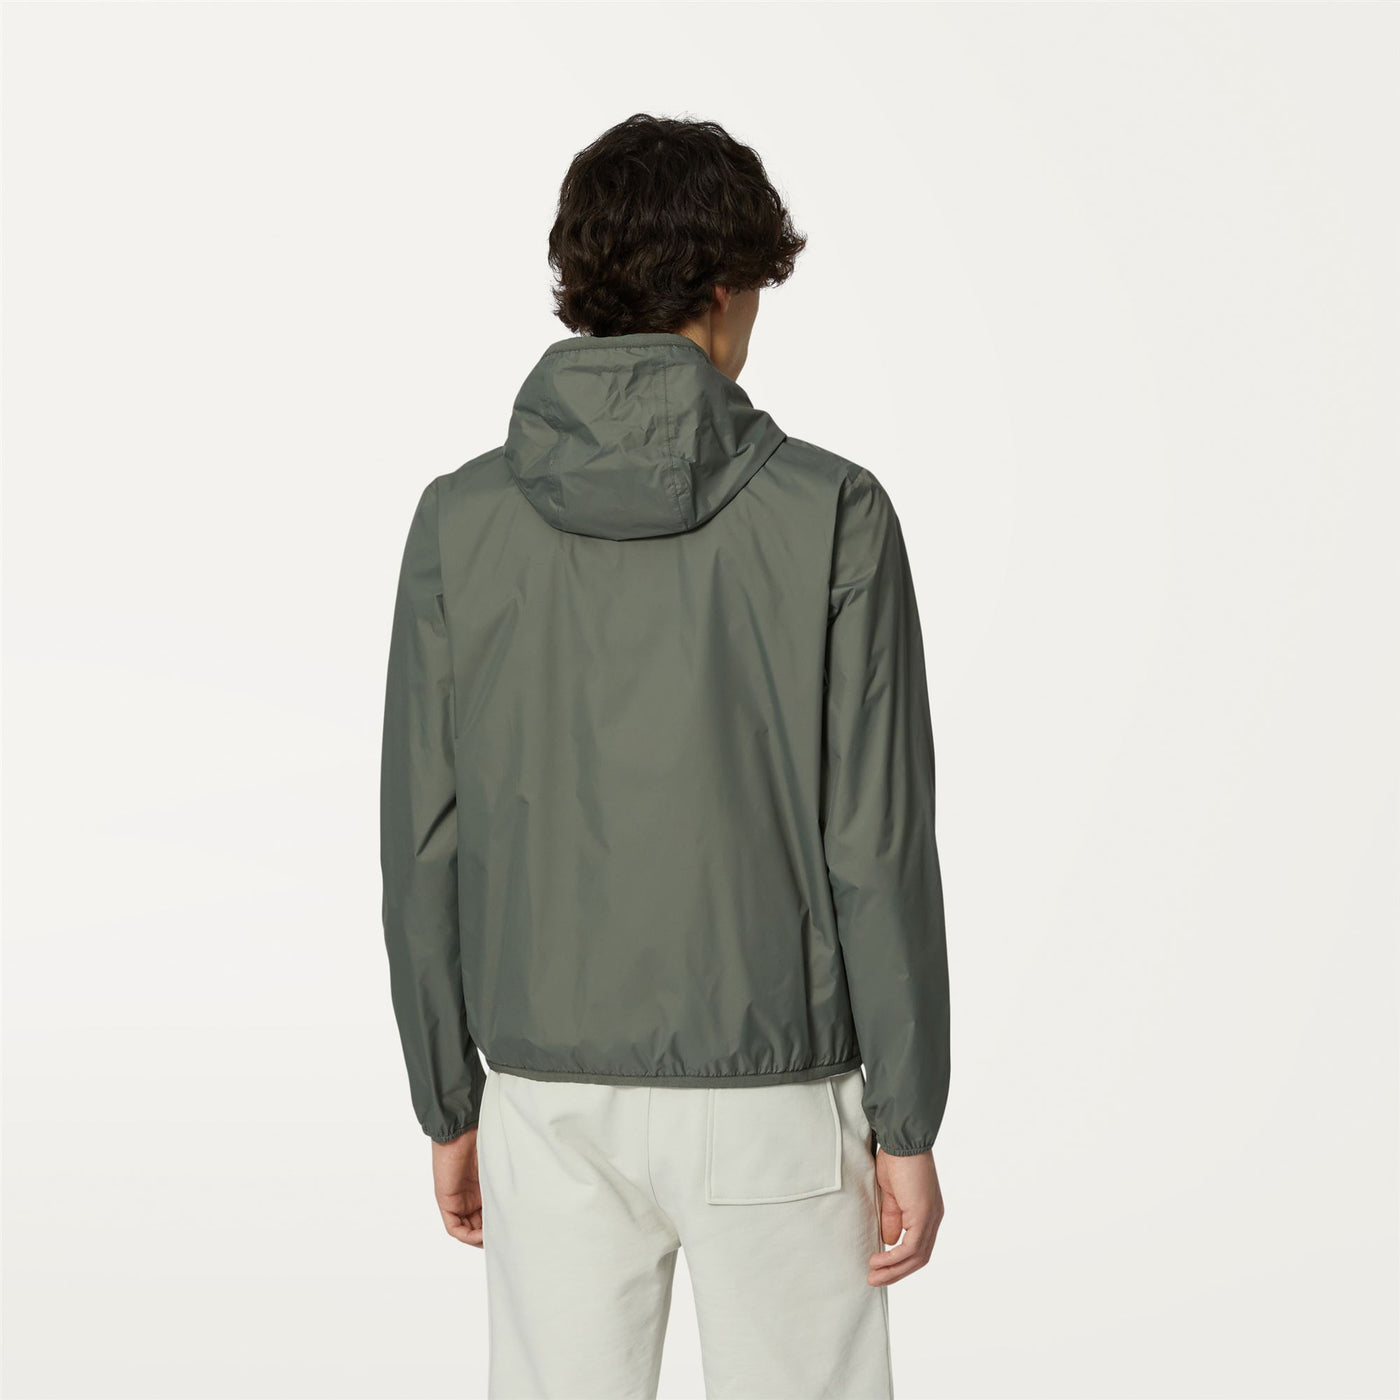 Jackets Man JACQUES PLUS.2 DOUBLE Short GREEN B-GREY A Dressed Front Double		